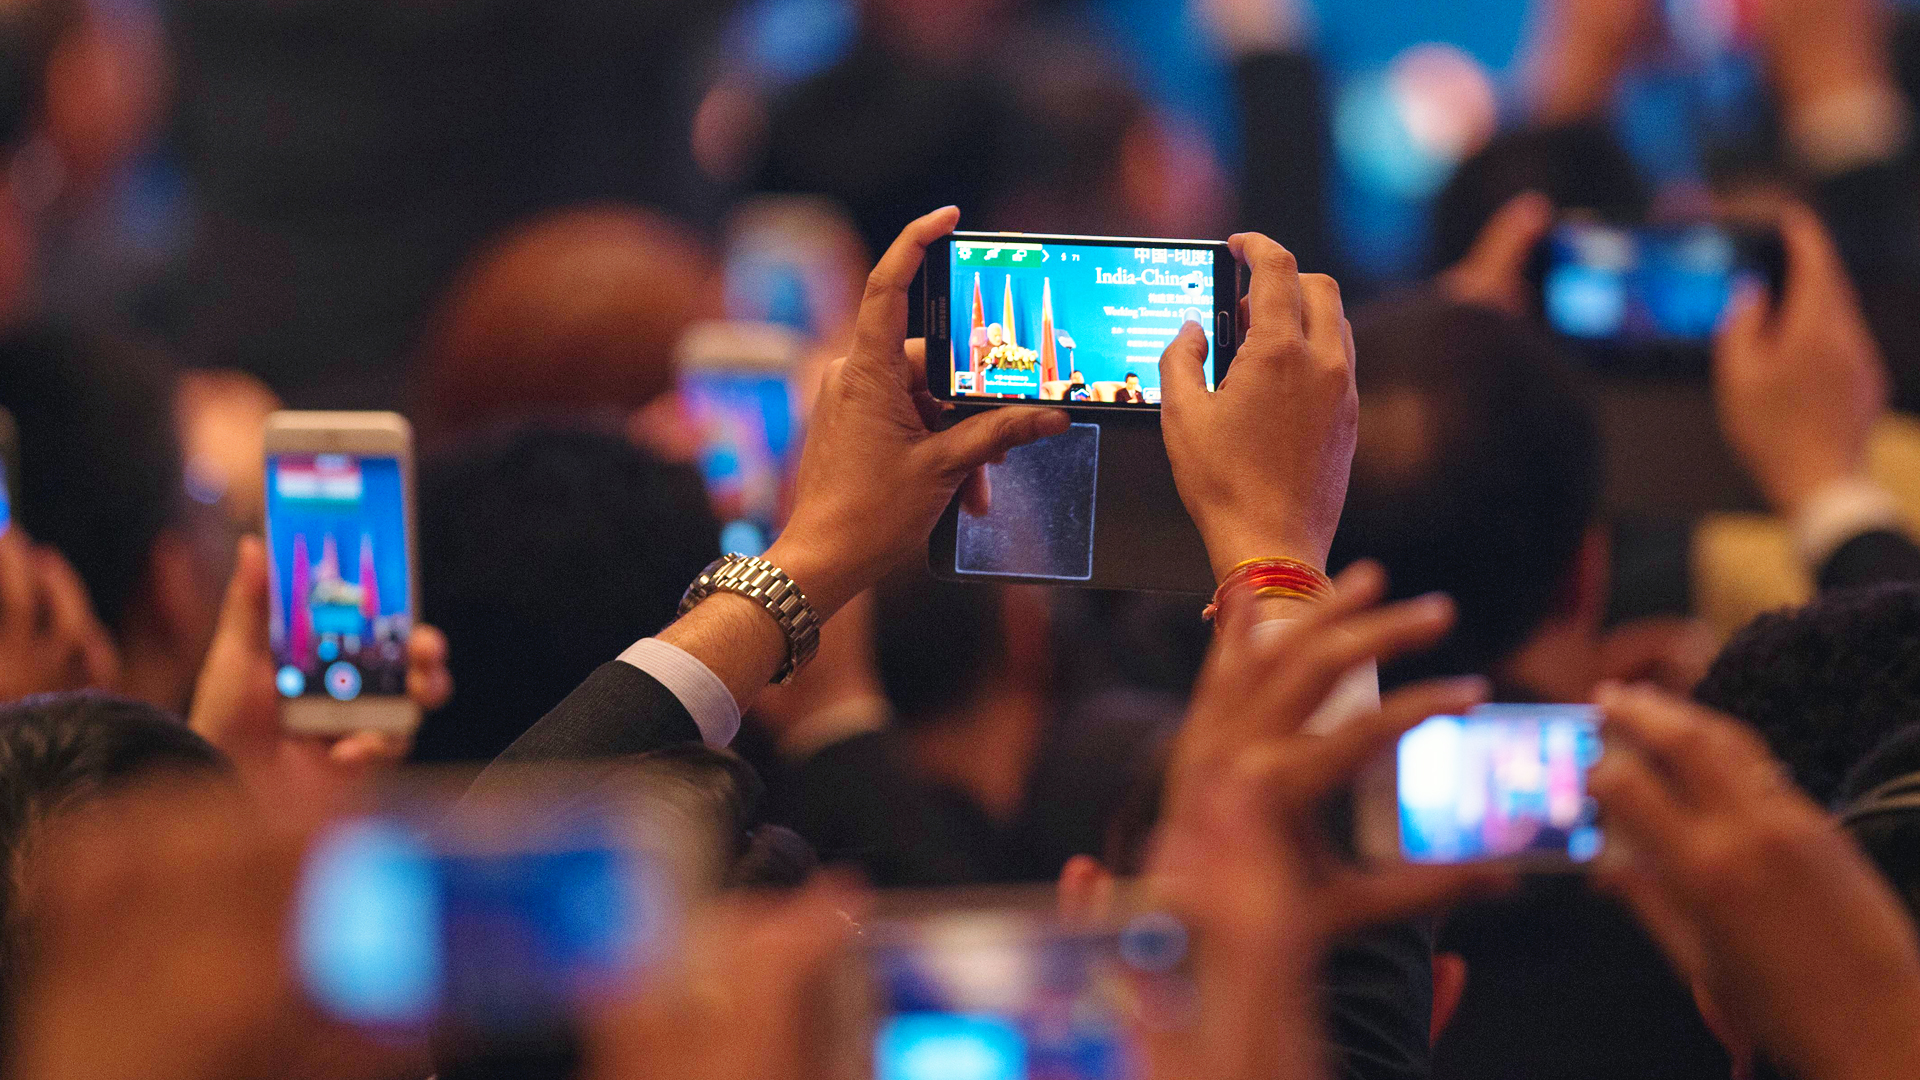 India's Prime Minister Narendra Modi is seen on mobile phone screens while he delivers a speech at the India-China Business Forum in Shanghai on May 16, 2015. Photo: AFP